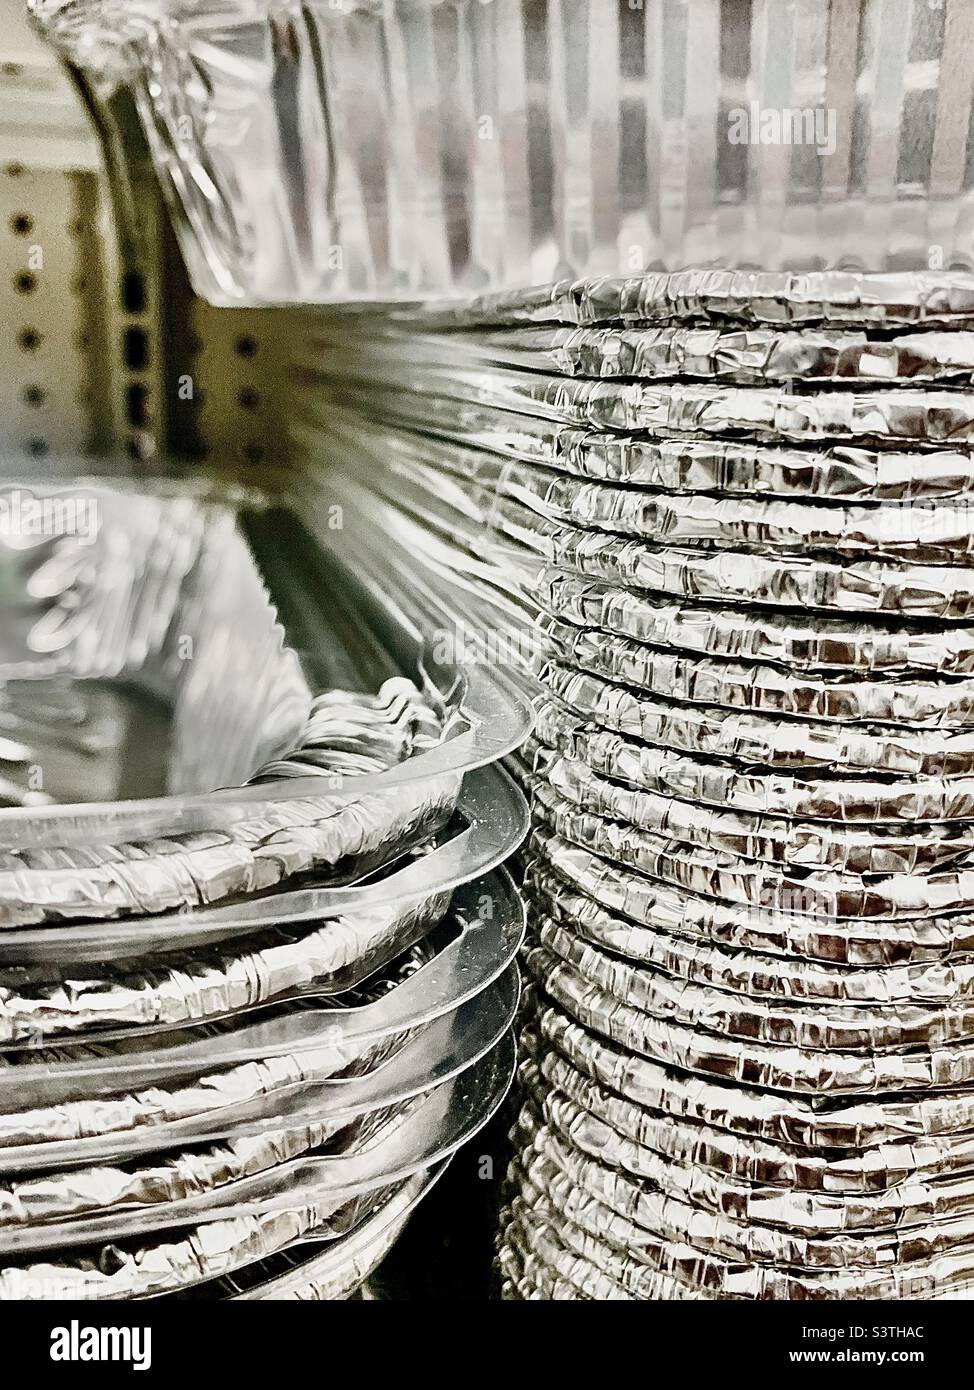 Stack of disposable silver cooking trays Stock Photo